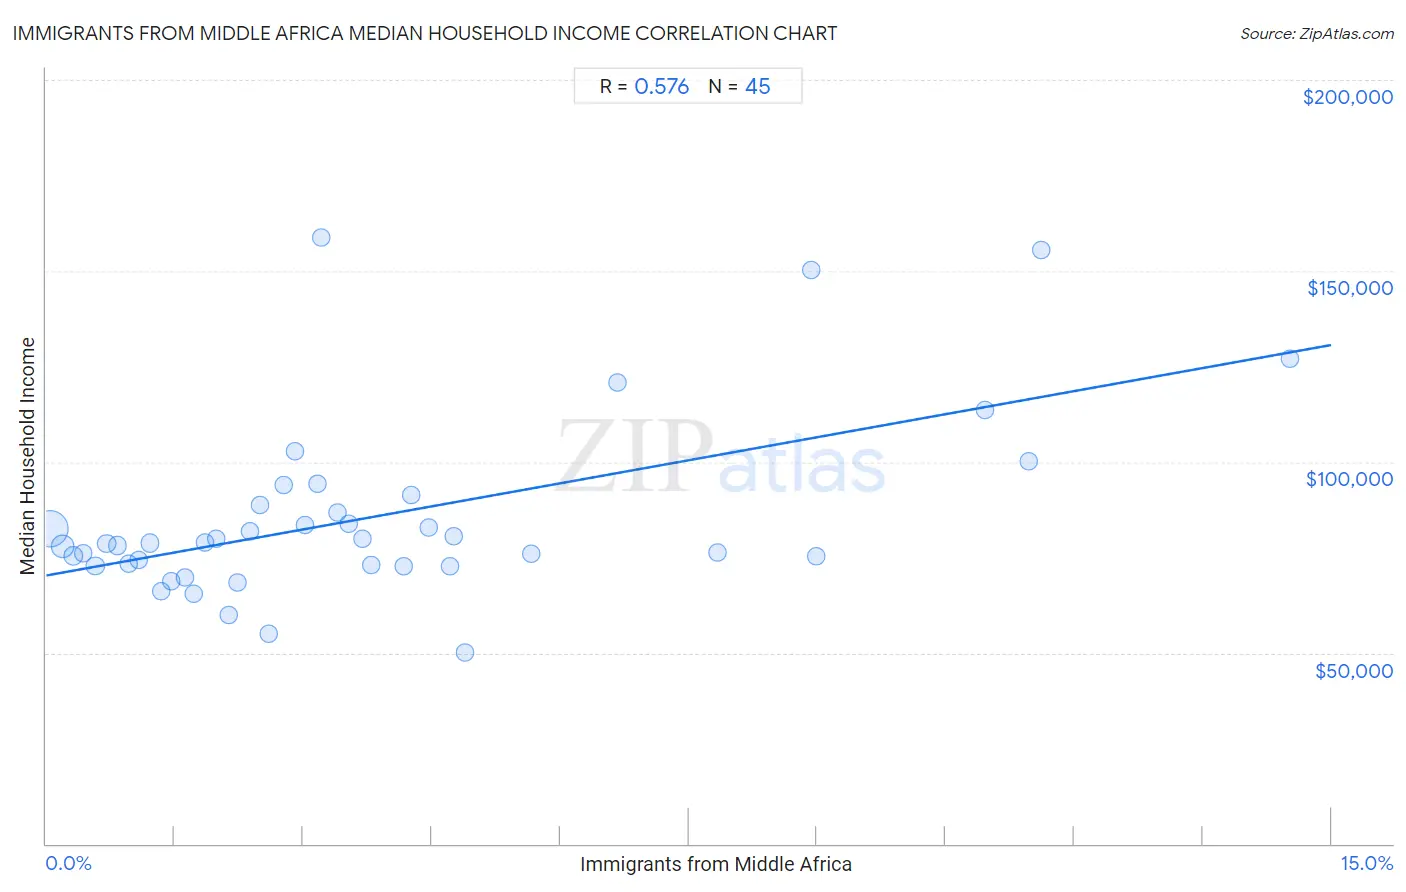 Immigrants from Middle Africa Median Household Income